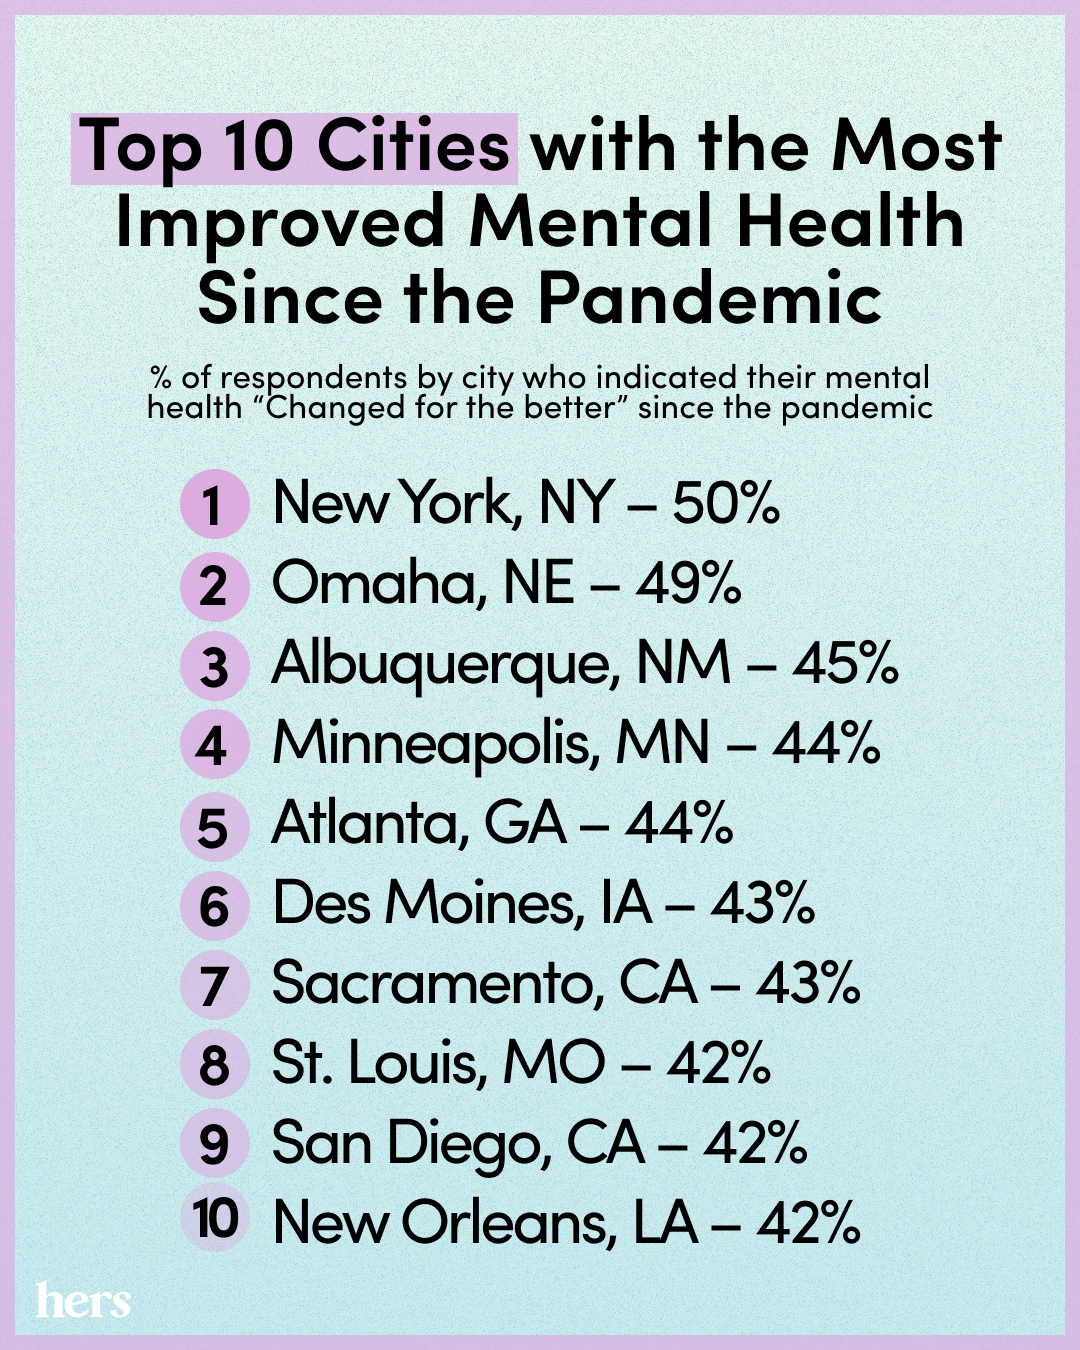 Top 10 Cities with the Most Improved Mental Health Since the Pandemic